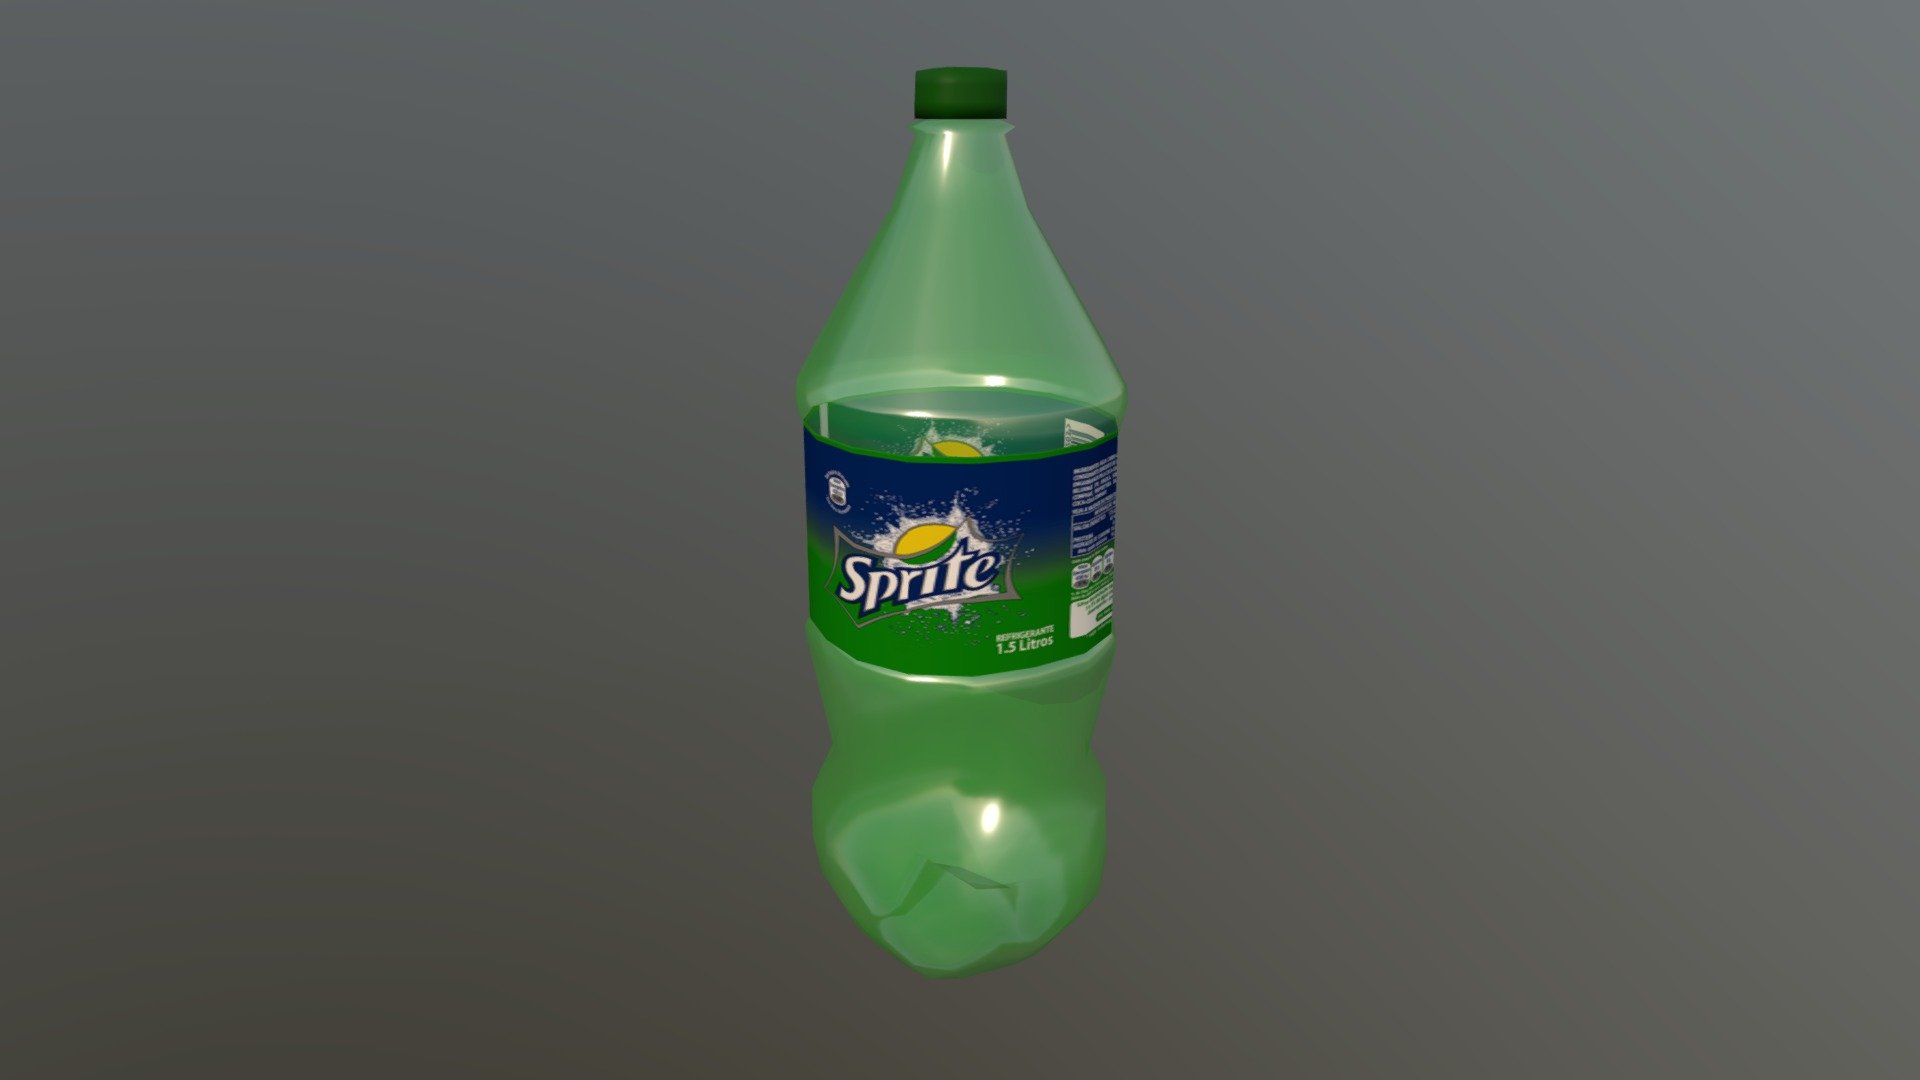 This is a 3D Sprite bottle modeled for an-in class project 3d model